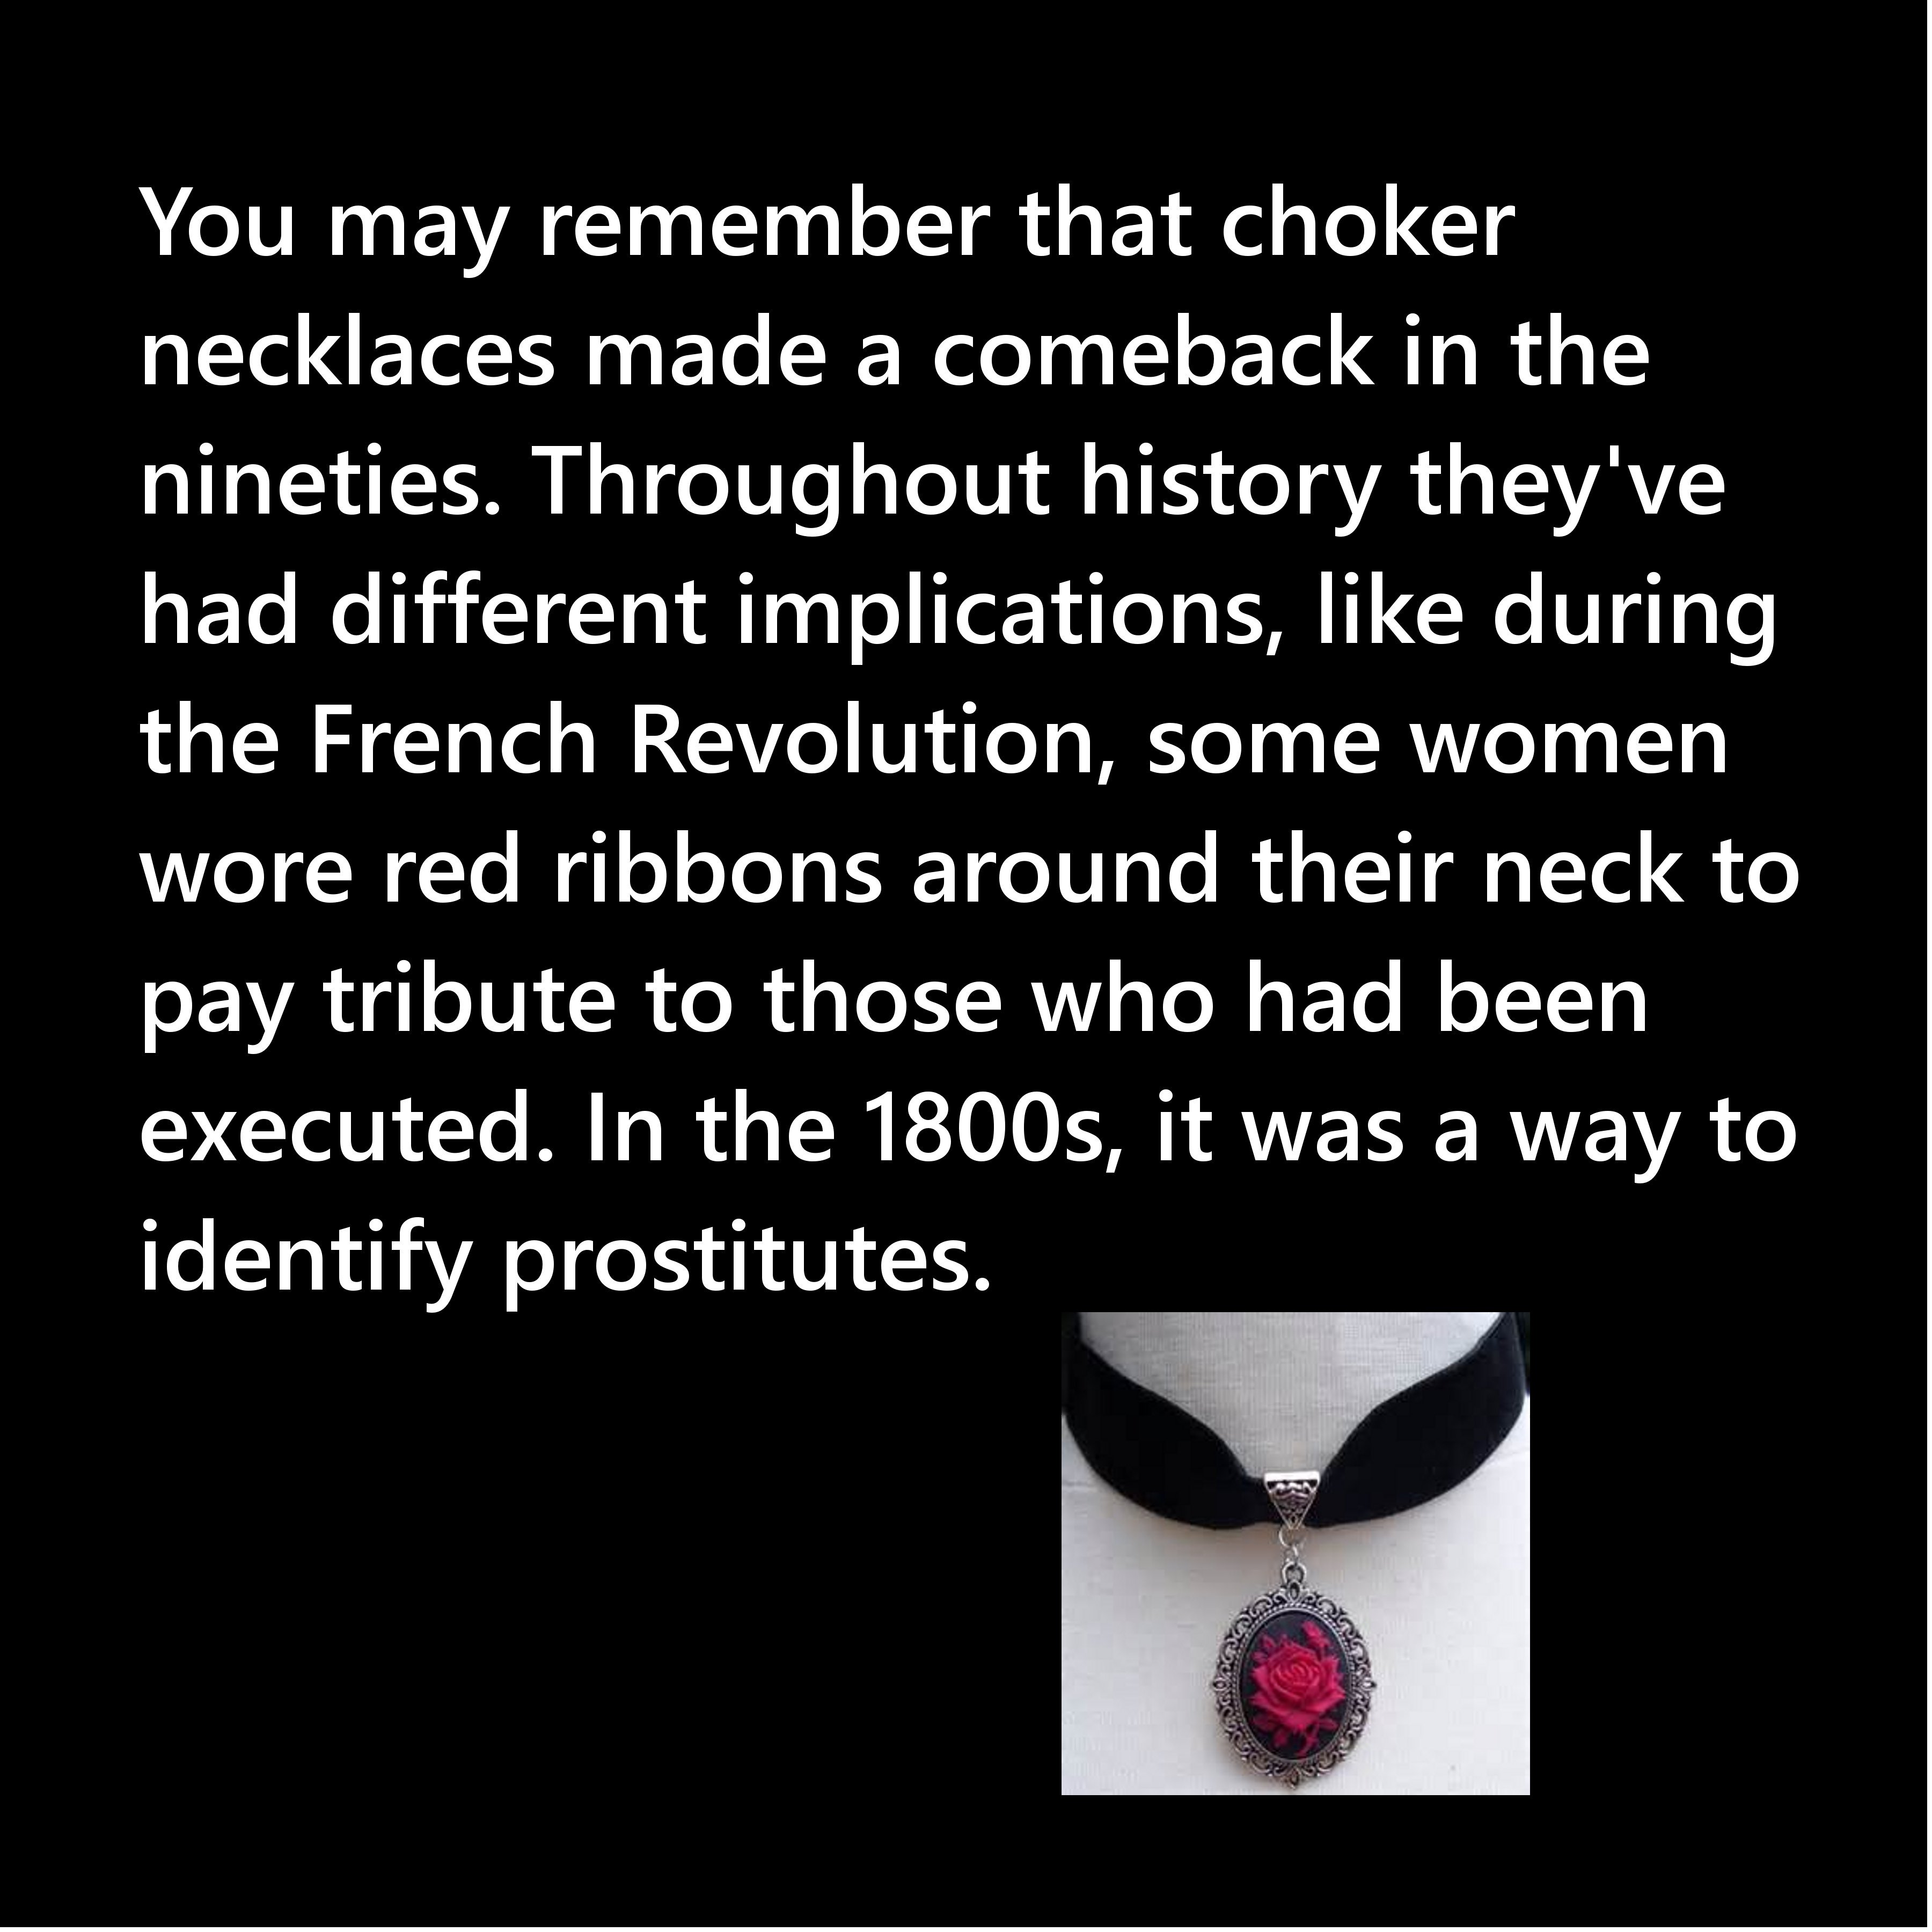 love - You may remember that choker necklaces made a comeback in the nineties. Throughout history they've had different implications, during the French Revolution, some women wore red ribbons around their neck to pay tribute to those who had been executed